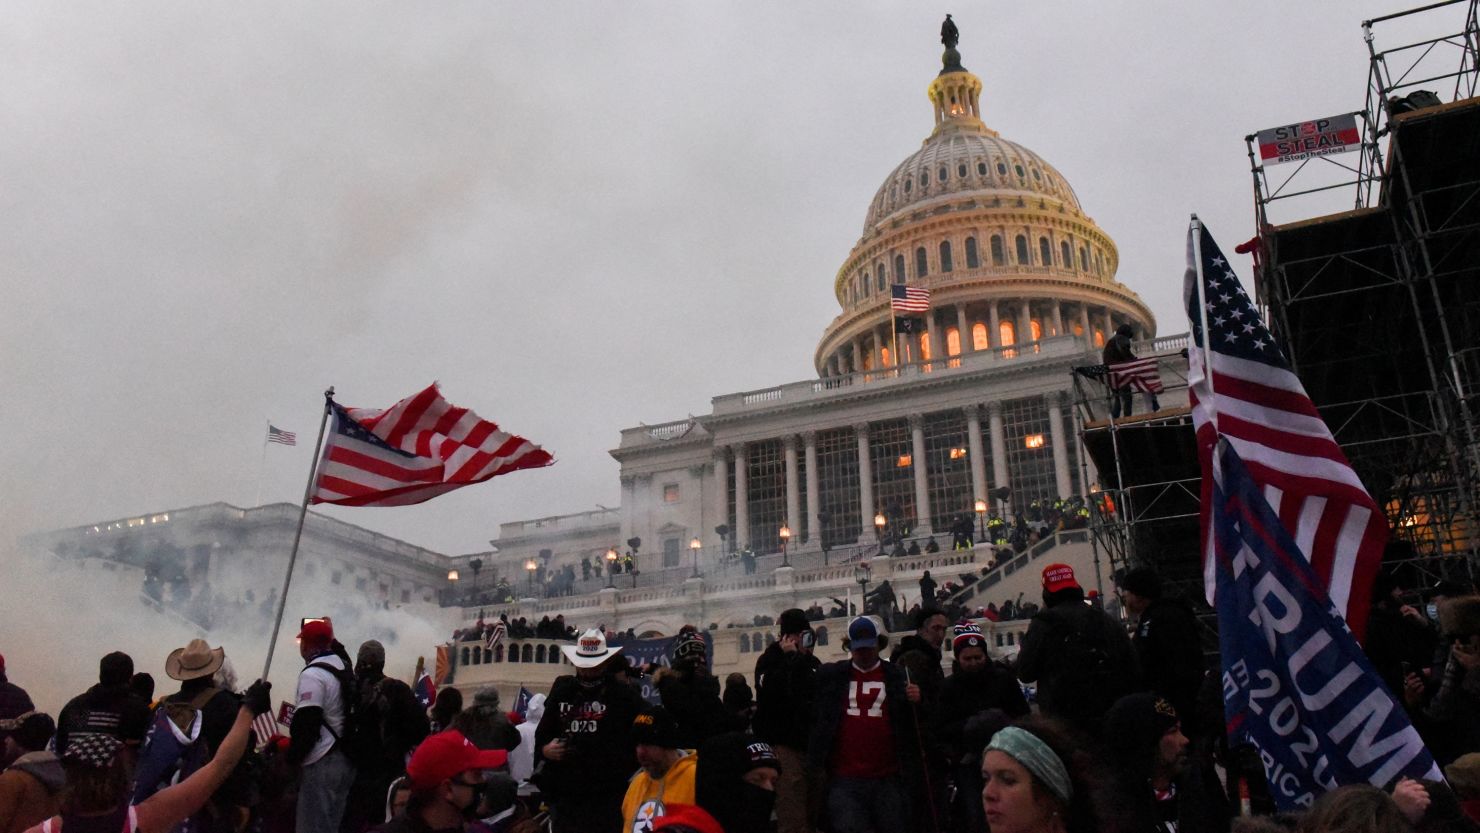 FILE PHOTO: Police clear the U.S. Capitol Building with tear gas as supporters of U.S. President Donald Trump gather outside, in Washington, U.S. January 6, 2021. REUTERS/Stephanie Keith/File Photo